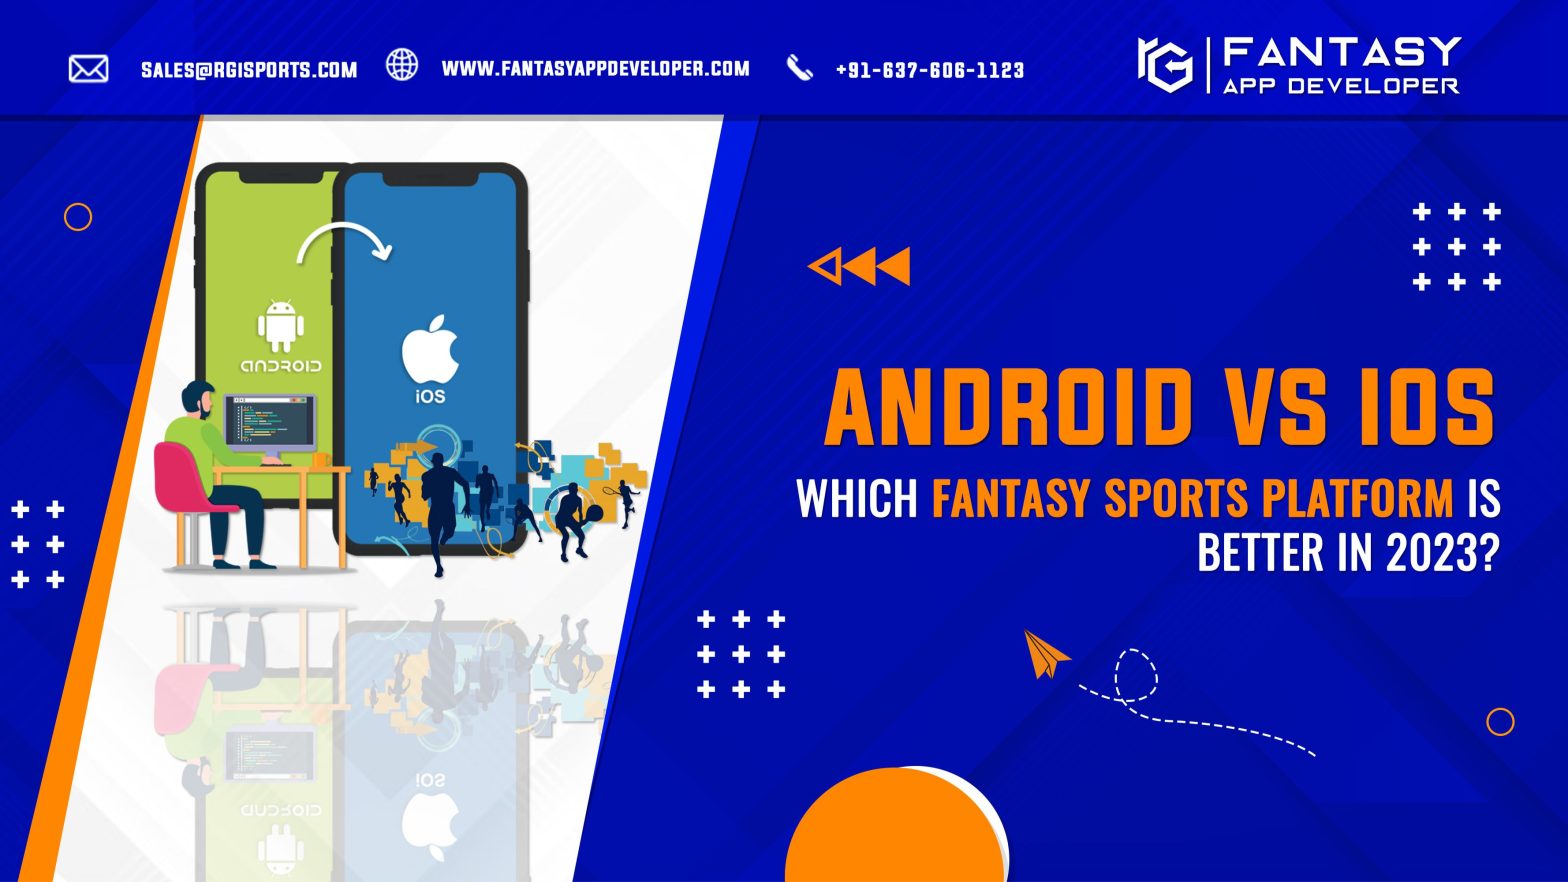 Android vs iOS Which Fantasy Sports Platform Is Better in 2023